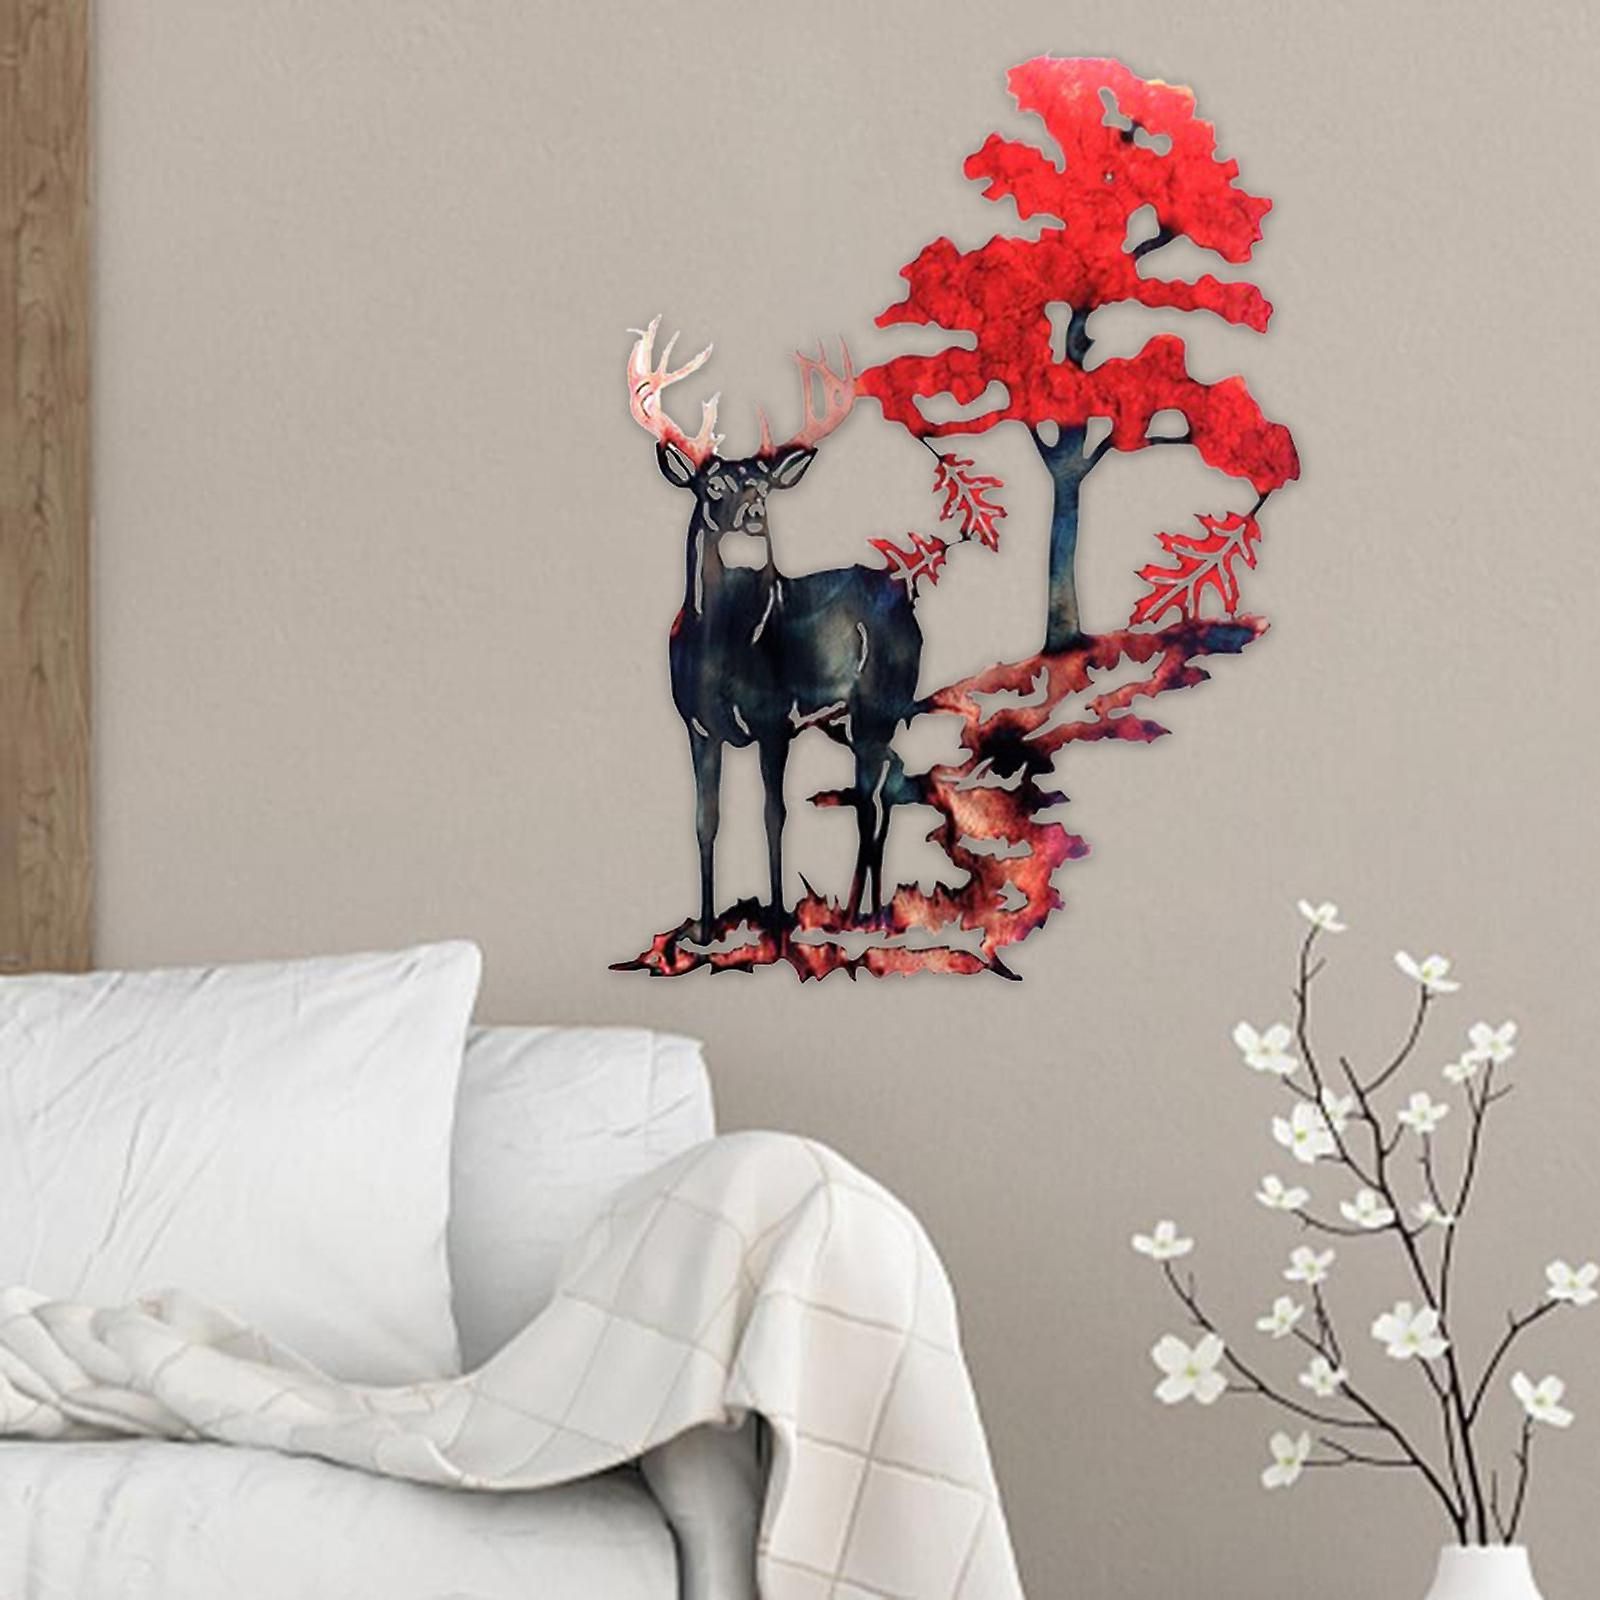 Most Recently Released Farmhouse Ornament Wall Art Within 3d Metal Wall Art Deer Wall Decor Hanging Woodland Scene Wall Art For  Indoor Outdoor Animal Artwork Rustic Home Office Cabin Farmhouse Decorations  – R (View 3 of 15)